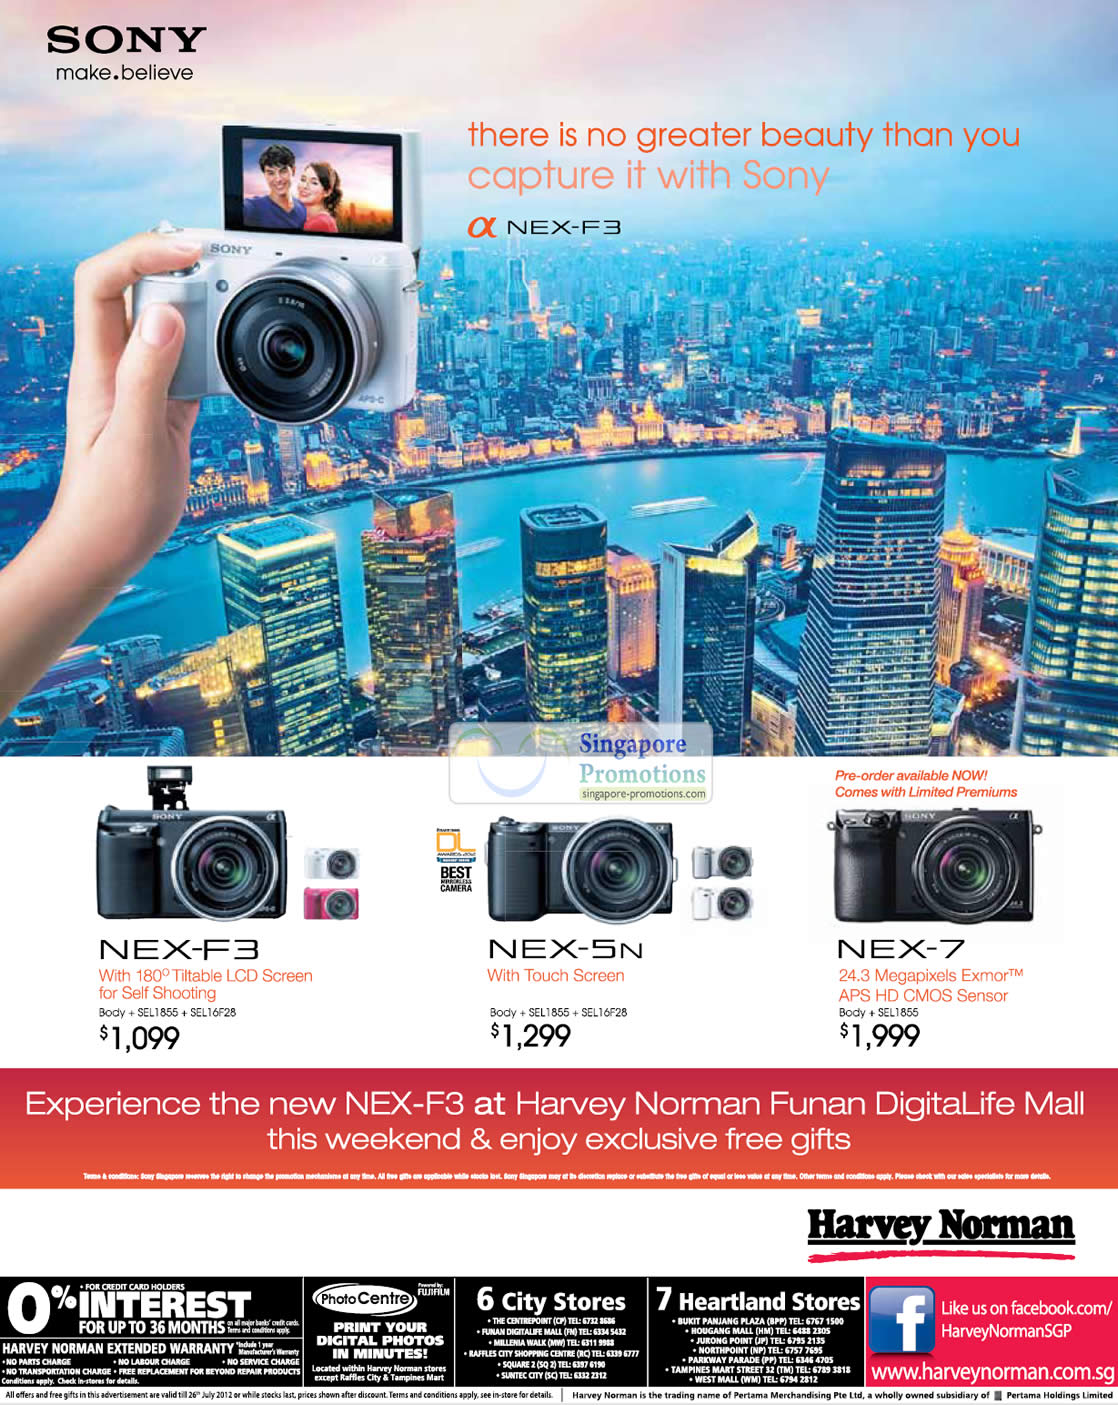 Featured image for Harvey Norman Digital Cameras, Furniture, Electronics & Appliances Offers 21 - 27 Jul 2012